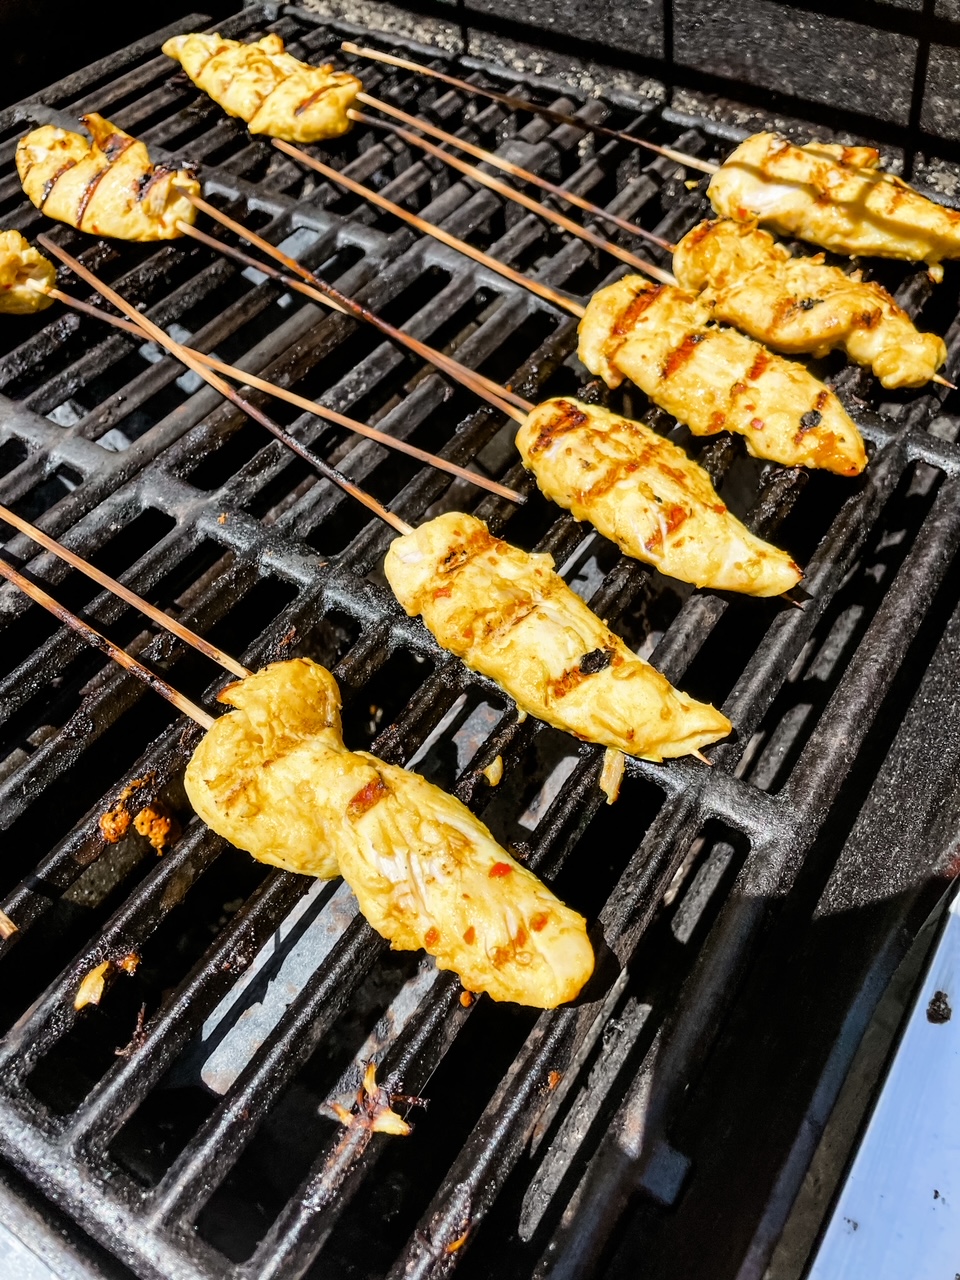 The skewers being grilled 